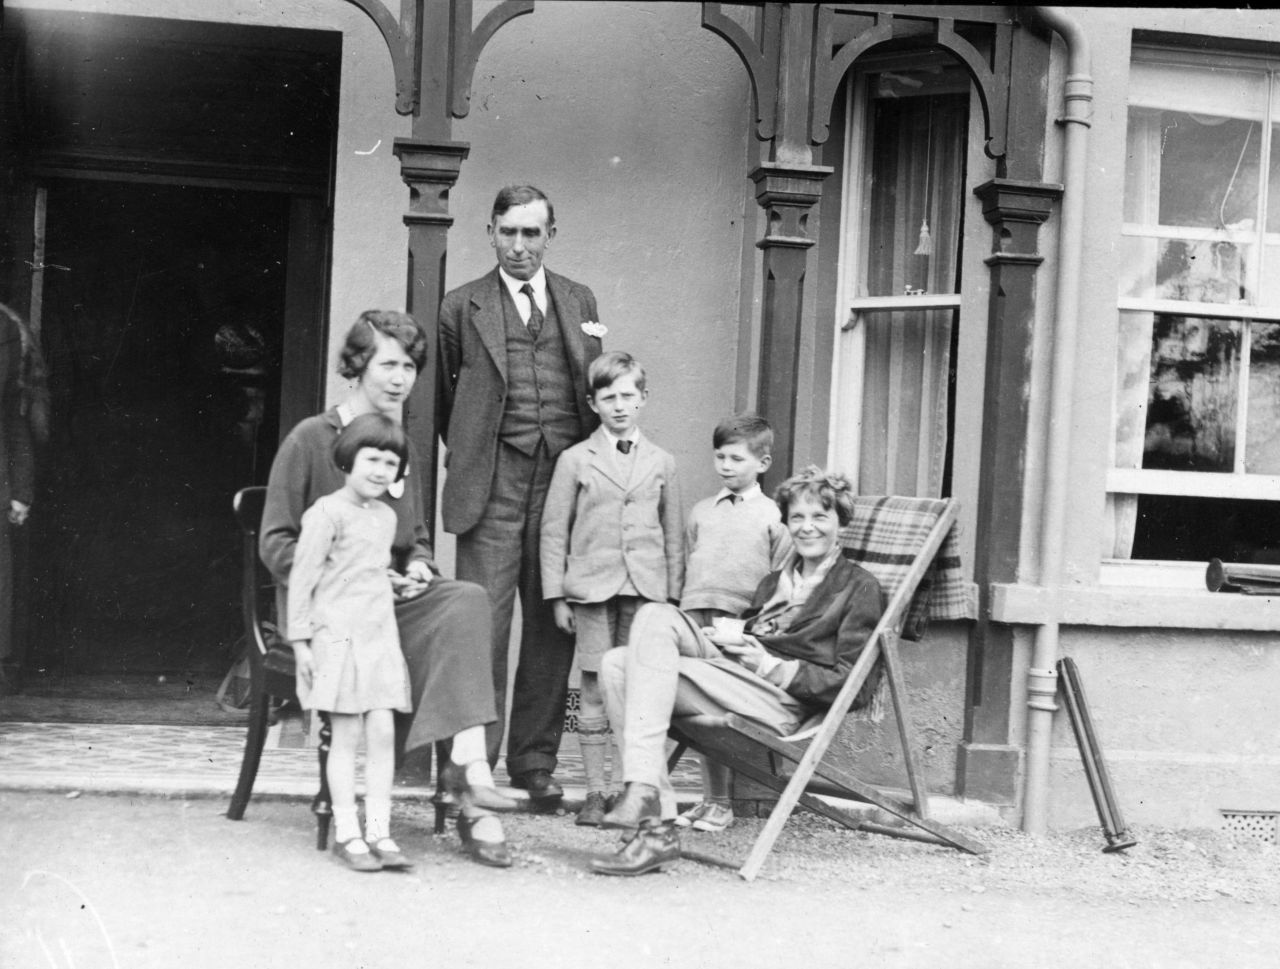 Earhart poses with the Gallagher family in Londonderry on May 24, 1932. Earhart landed her plane in the family's field after her solo flight across the Atlantic.